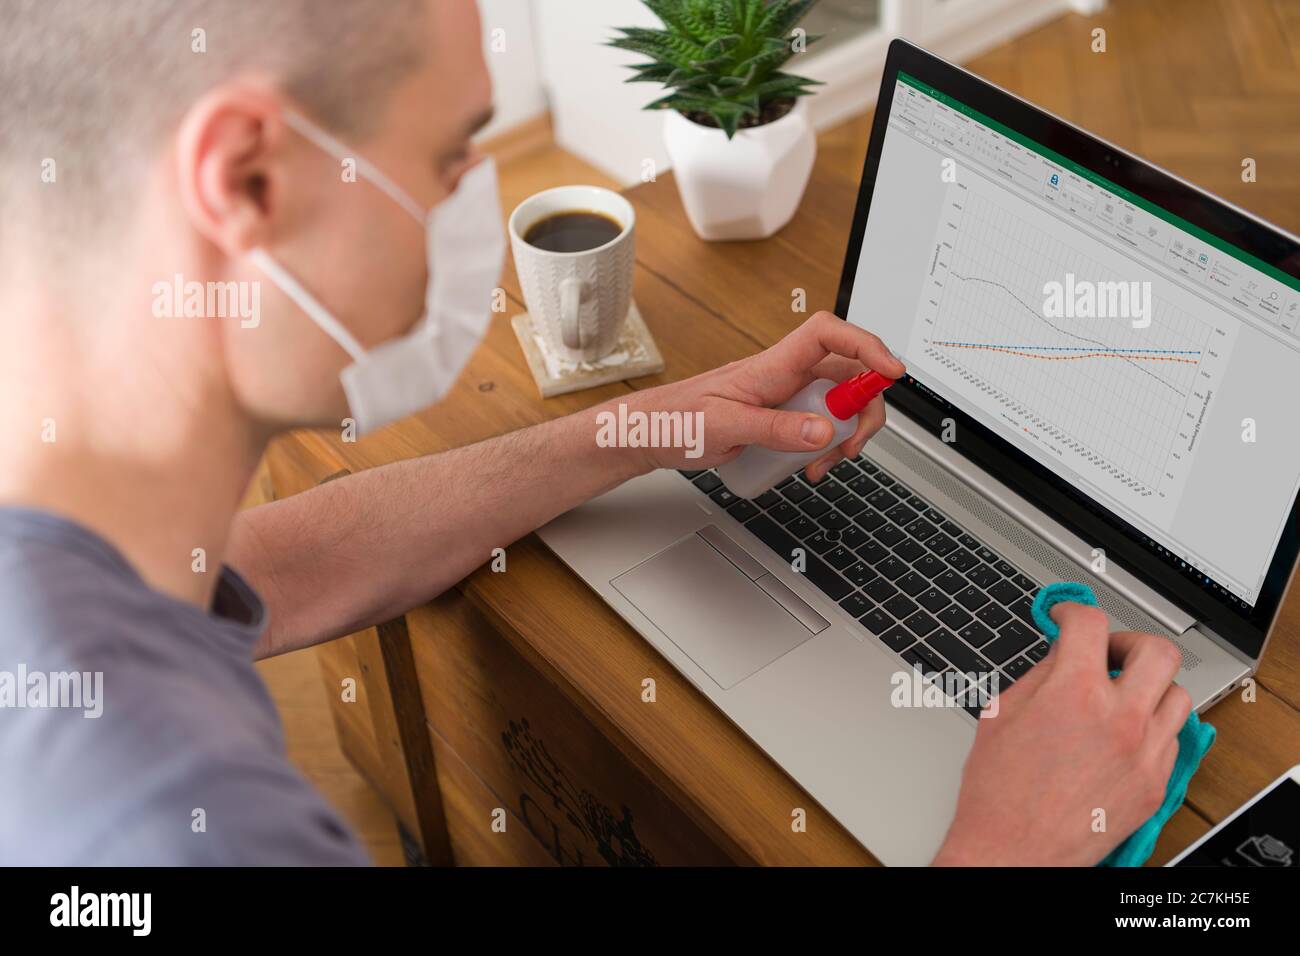 Home office, quarantine, COVID-19, face mask, clean Stock Photo